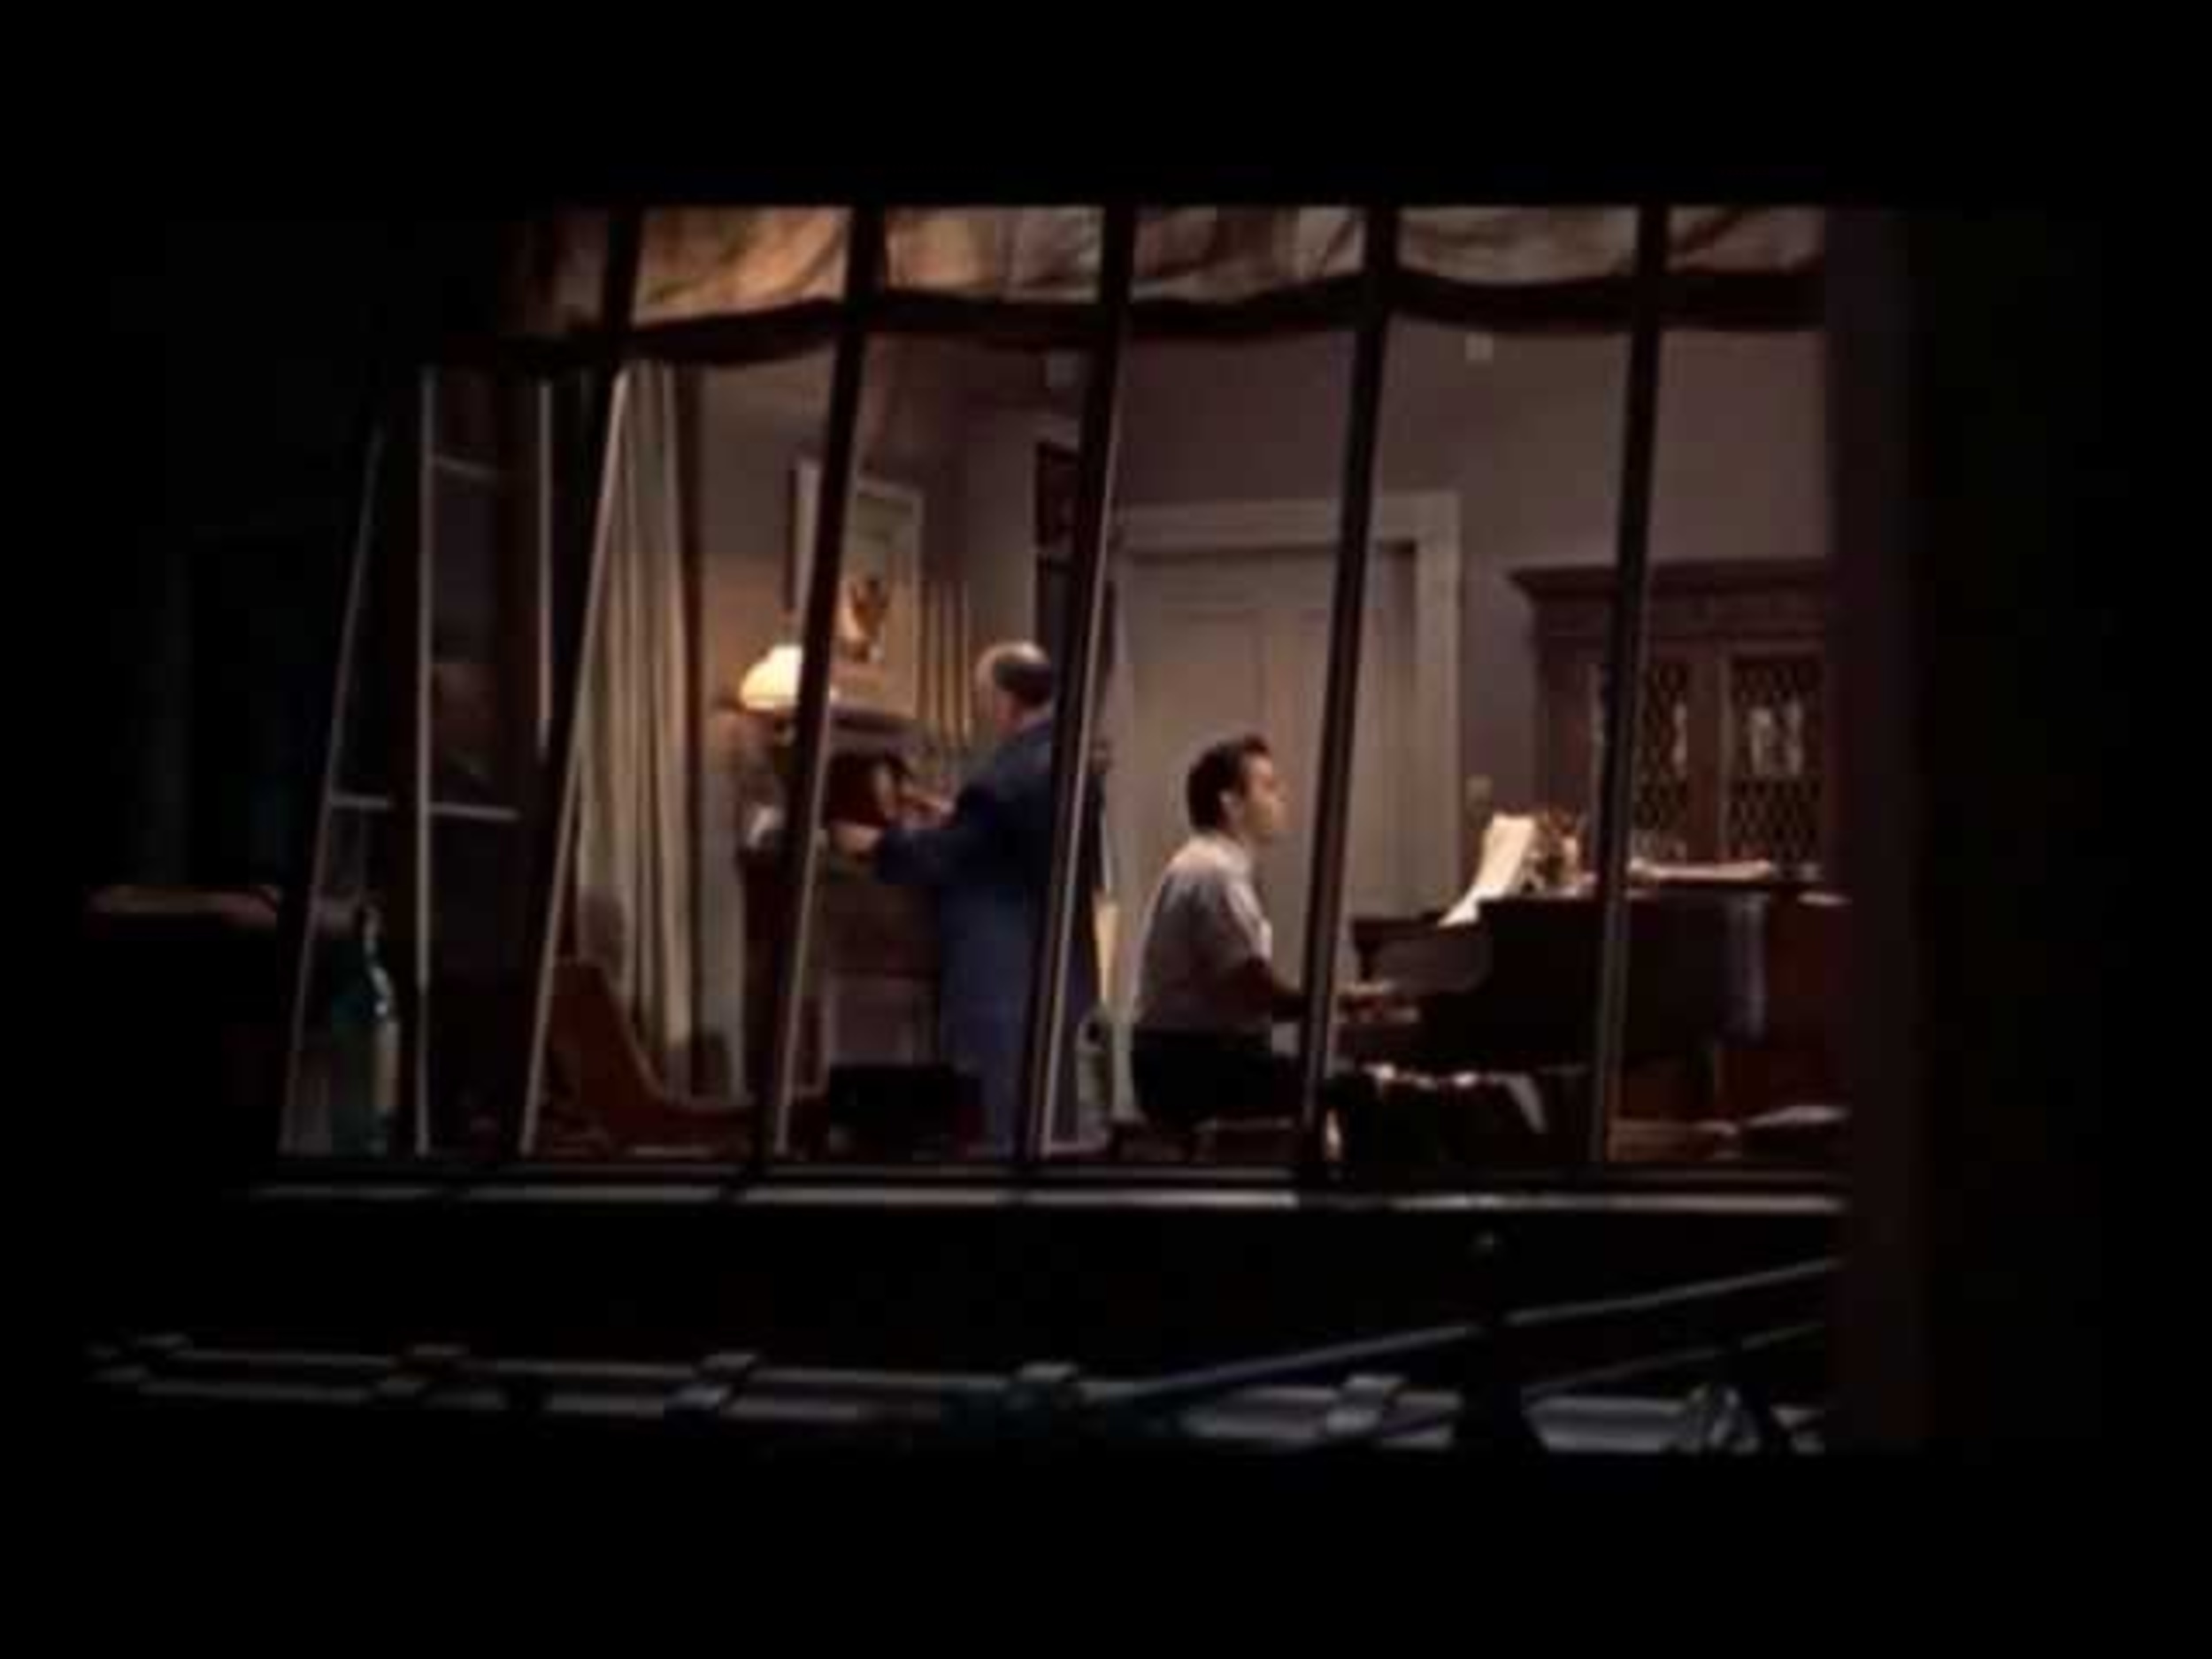 <p>“Rear Window” is all about Jimmy Stewart looking into people’s lives. He peers into windows and spies on what’s going on. In one of the homes, he can be seen winding a clock while another man plays the piano. Nothing too salacious there. Raymond Burr’s apartment? That’s another story.</p>